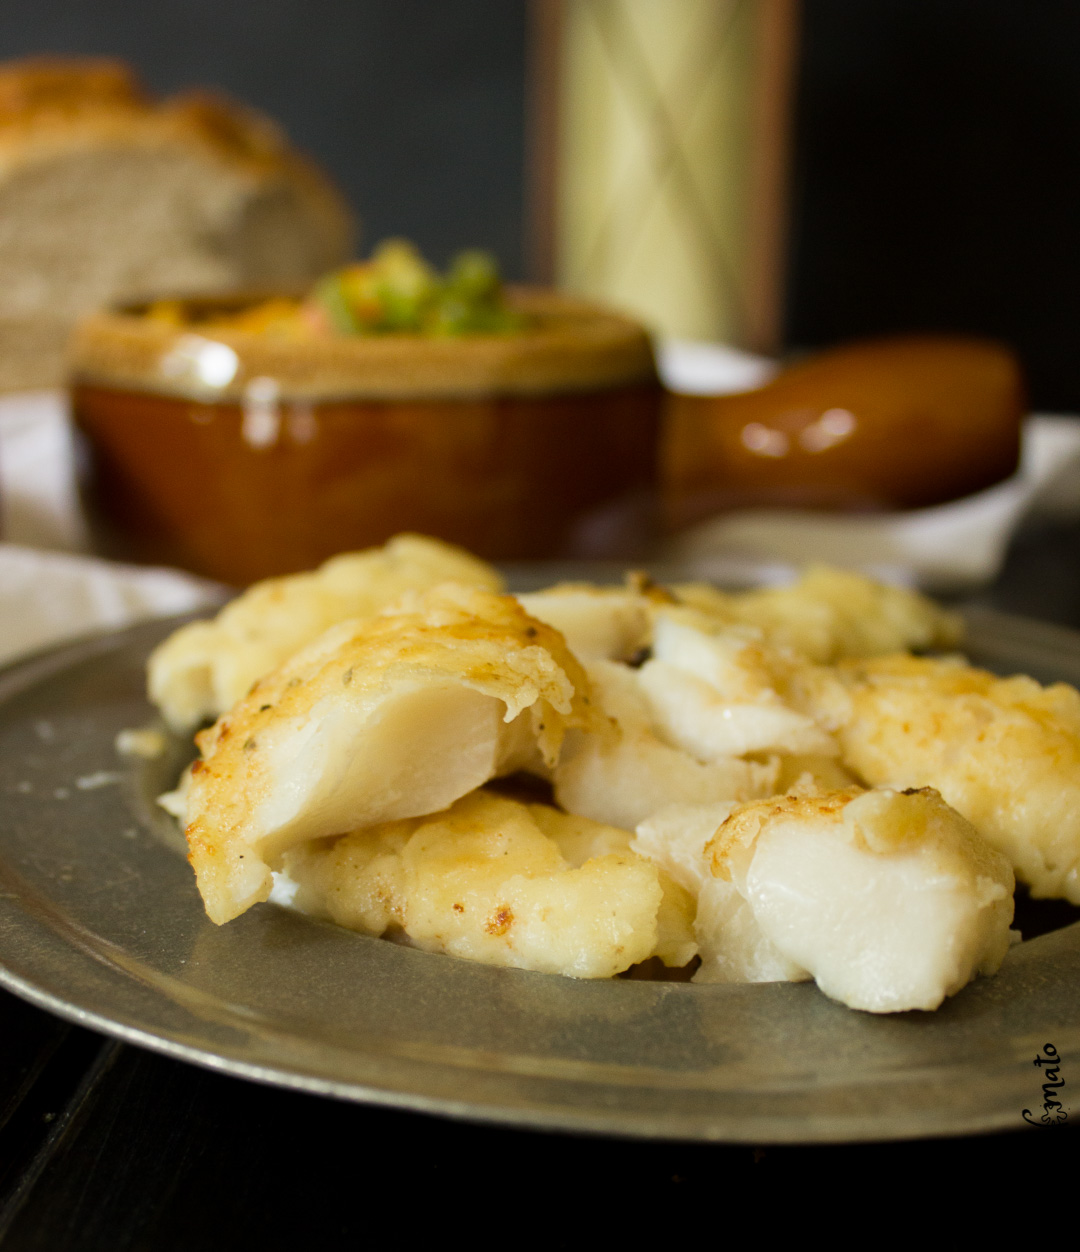 Pan-Fried Haddock is a summer Nova Scotia classic. It's light, flaky and ready in ten minutes!